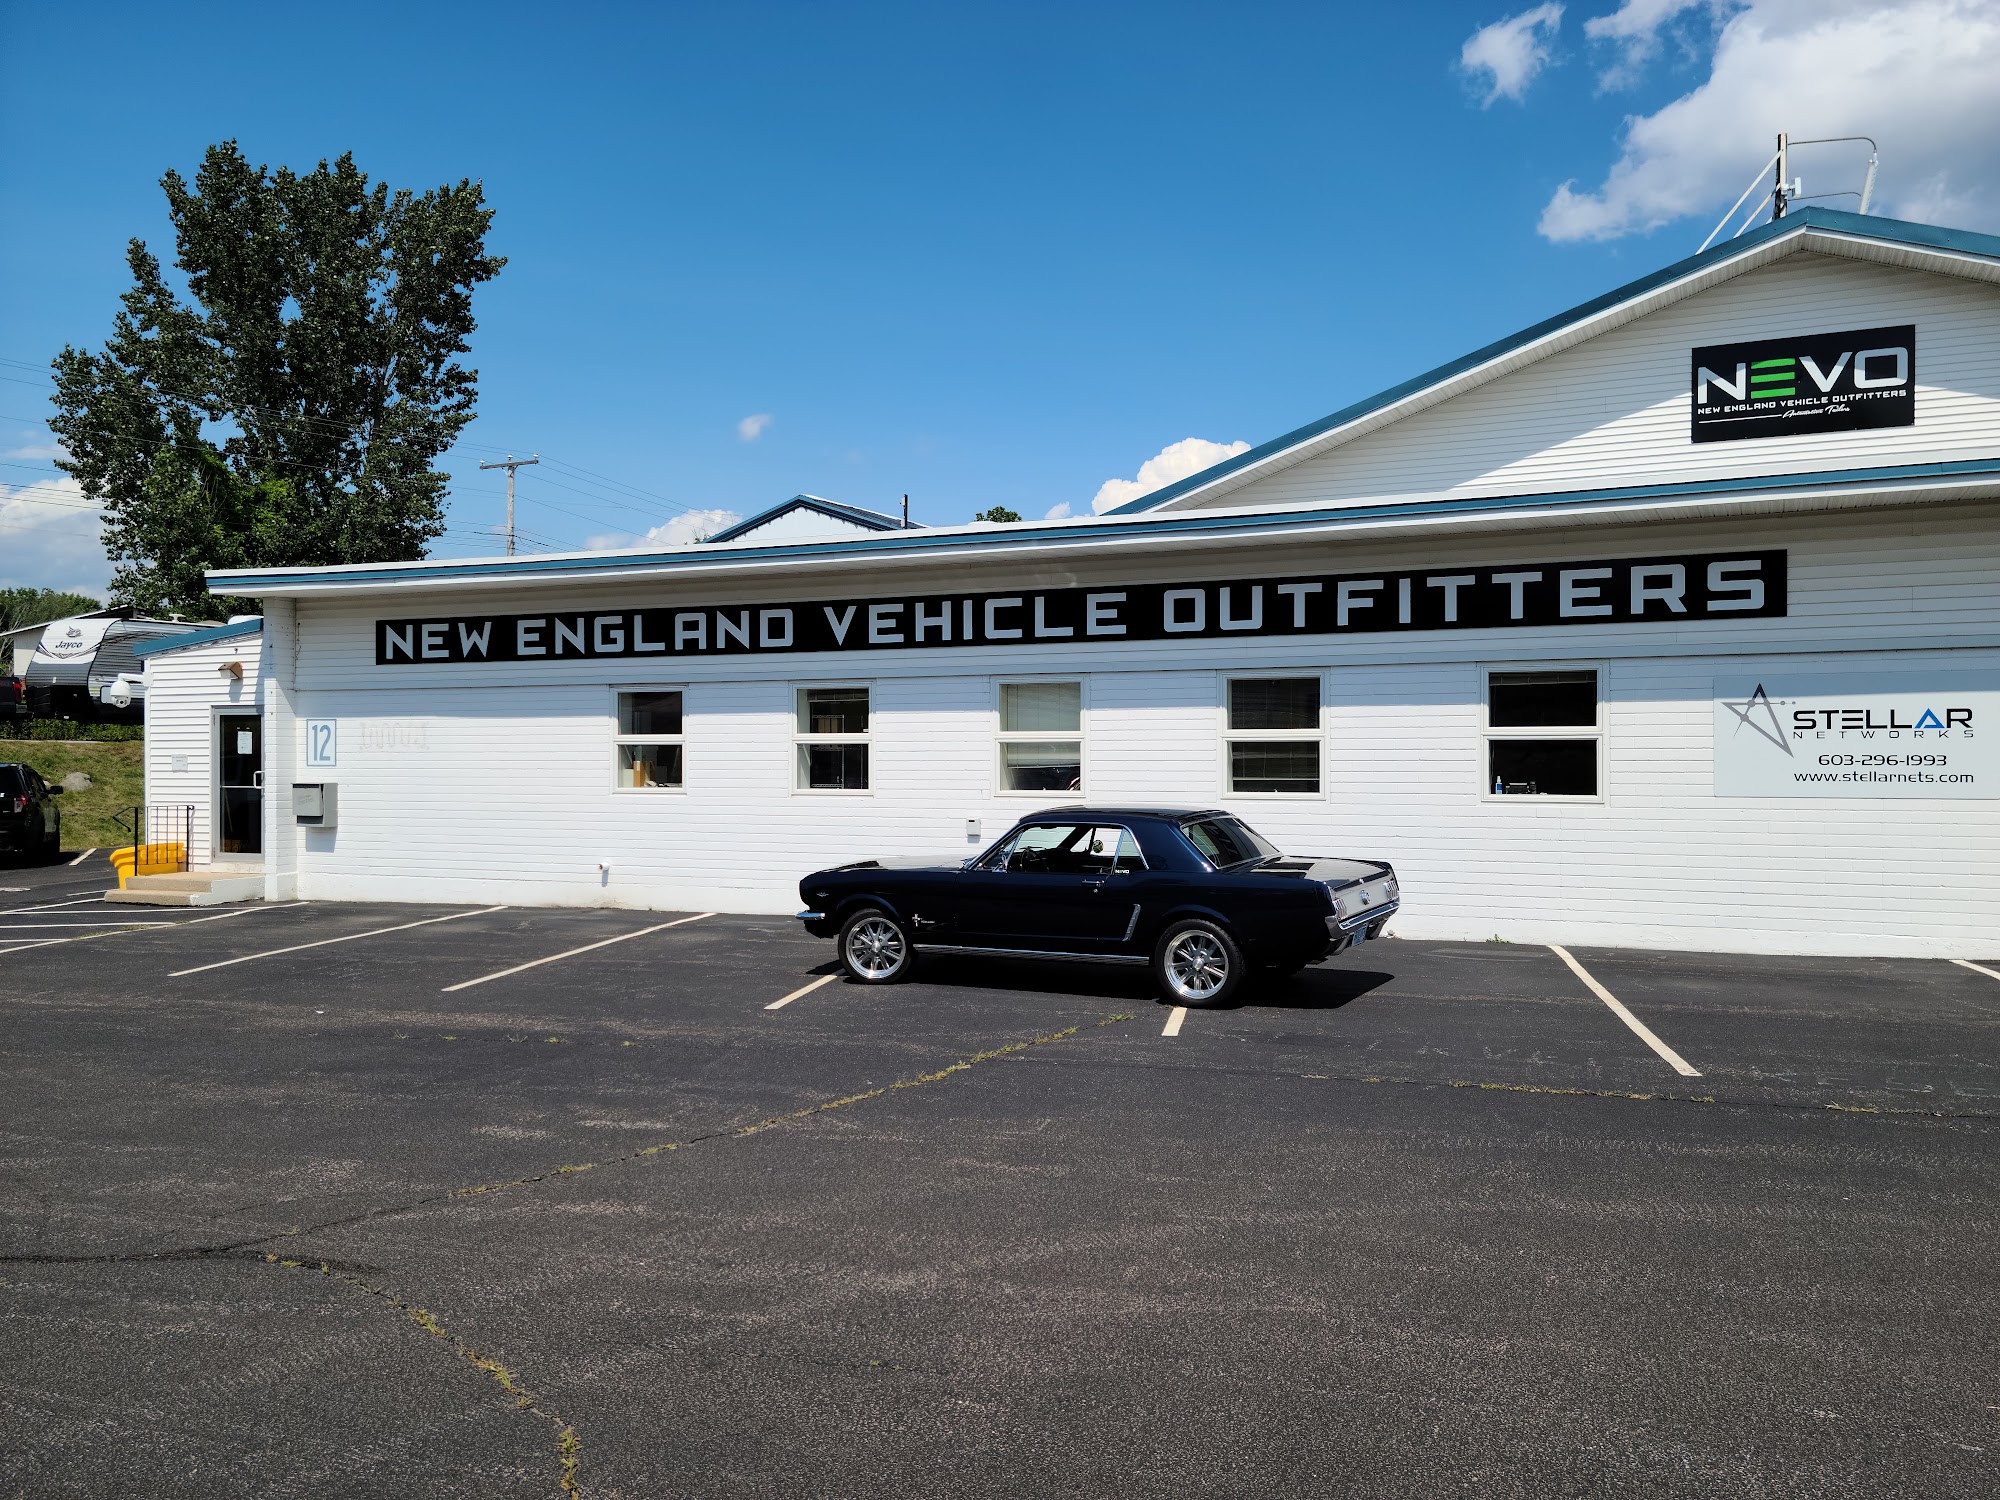 New England Vehicle Outfitters